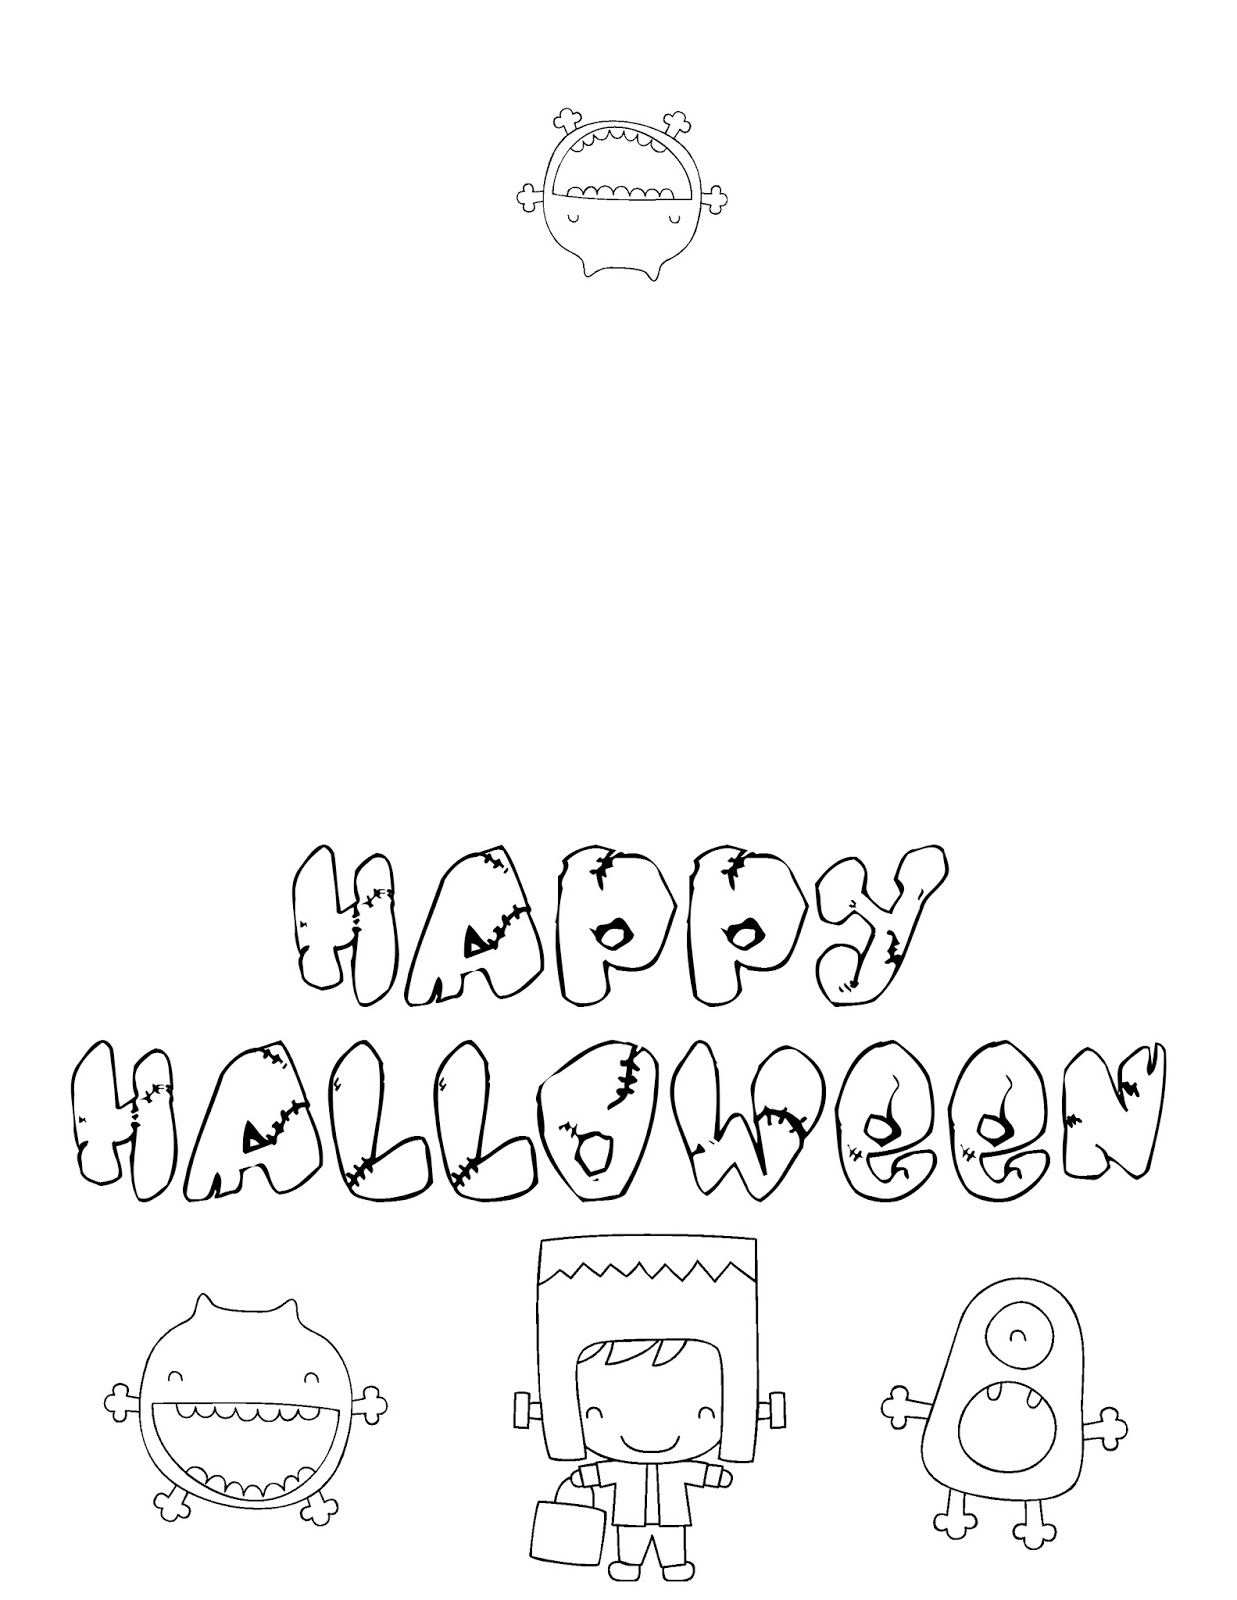 Printable Halloween Cards To Color For Free | Download Them Or Print - Printable Halloween Cards To Color For Free